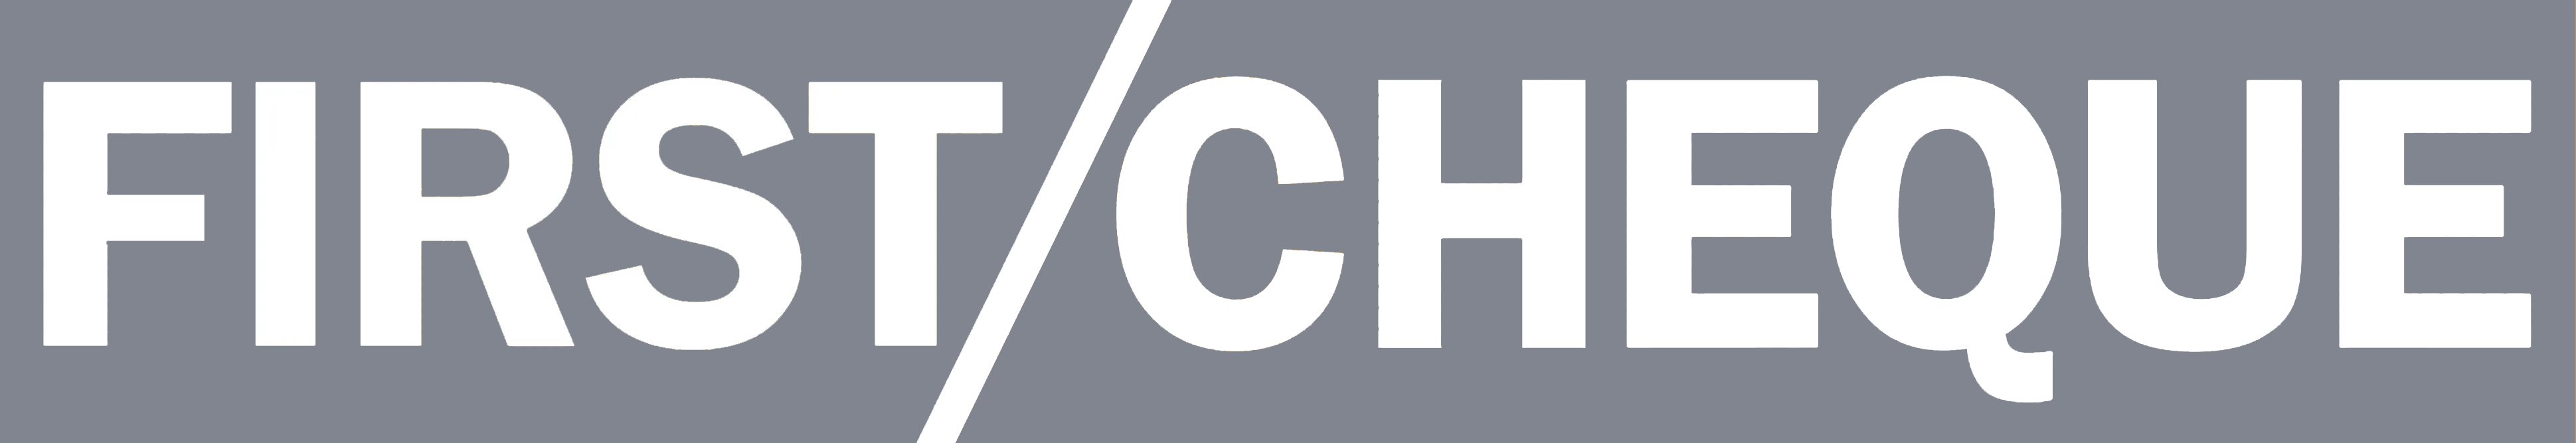 Logo of a venture capital firm that uses Taghash